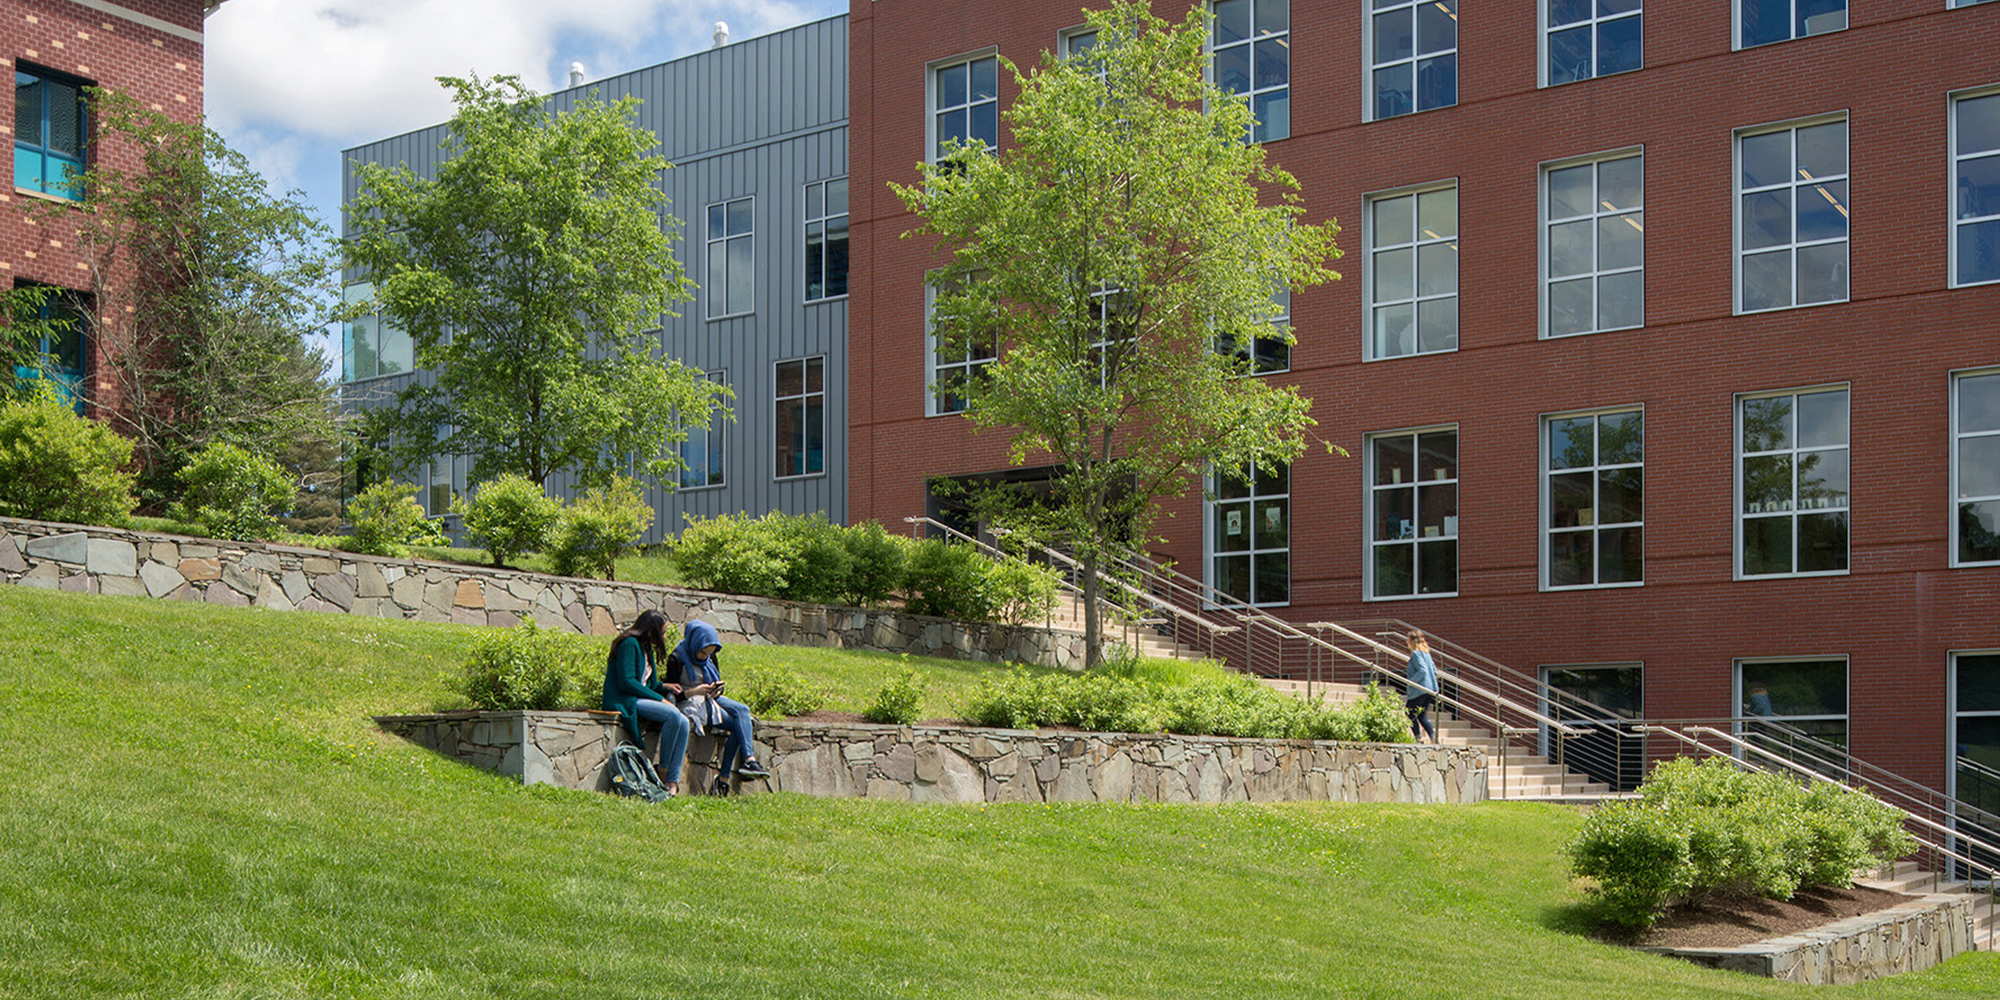 Steep slopes and seating as part of the North District Plan at the University of Rhode Island (URI) campus